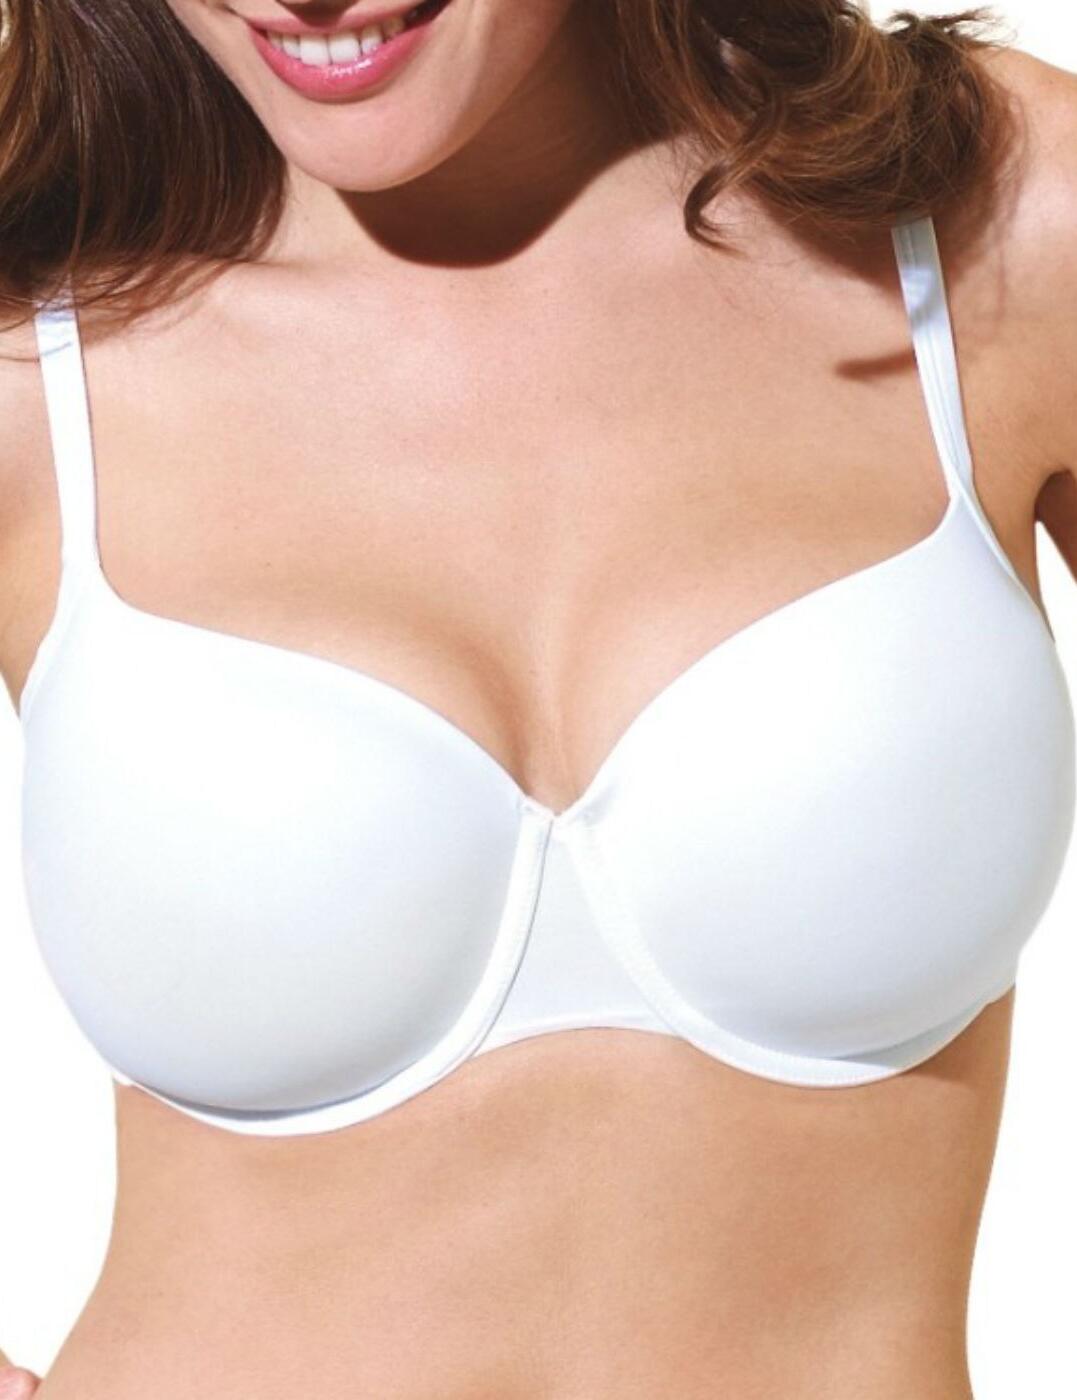 Panache Porcelain Moulded Bra 3376 Underwired Balcony T-Shirt